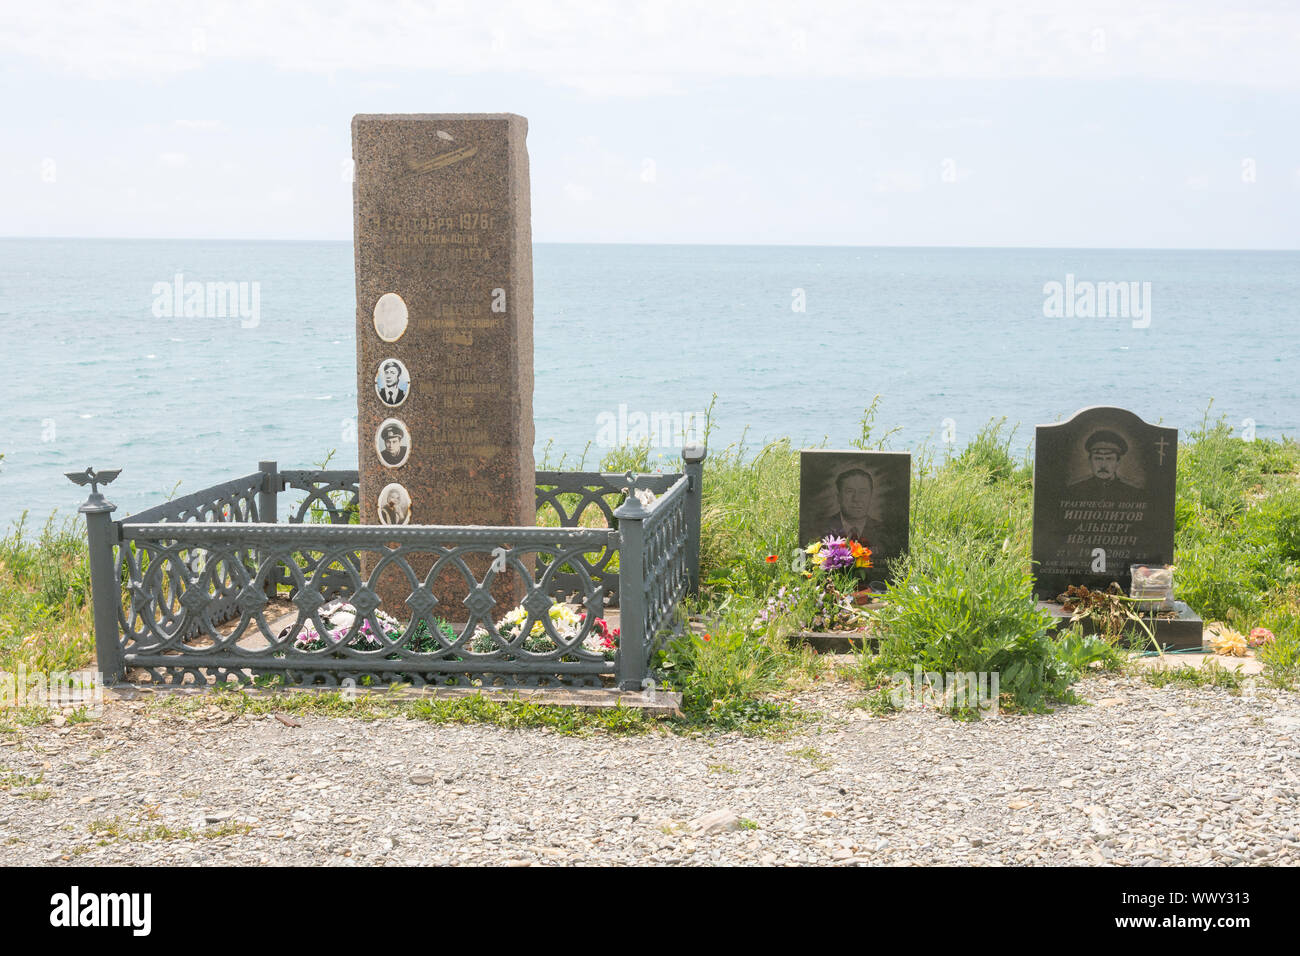 Big Utrish, Russia - May 17, 2016: Monument to the crew of the aircraft Yak-40 crashed in 1976 off the island of Utrish Stock Photo